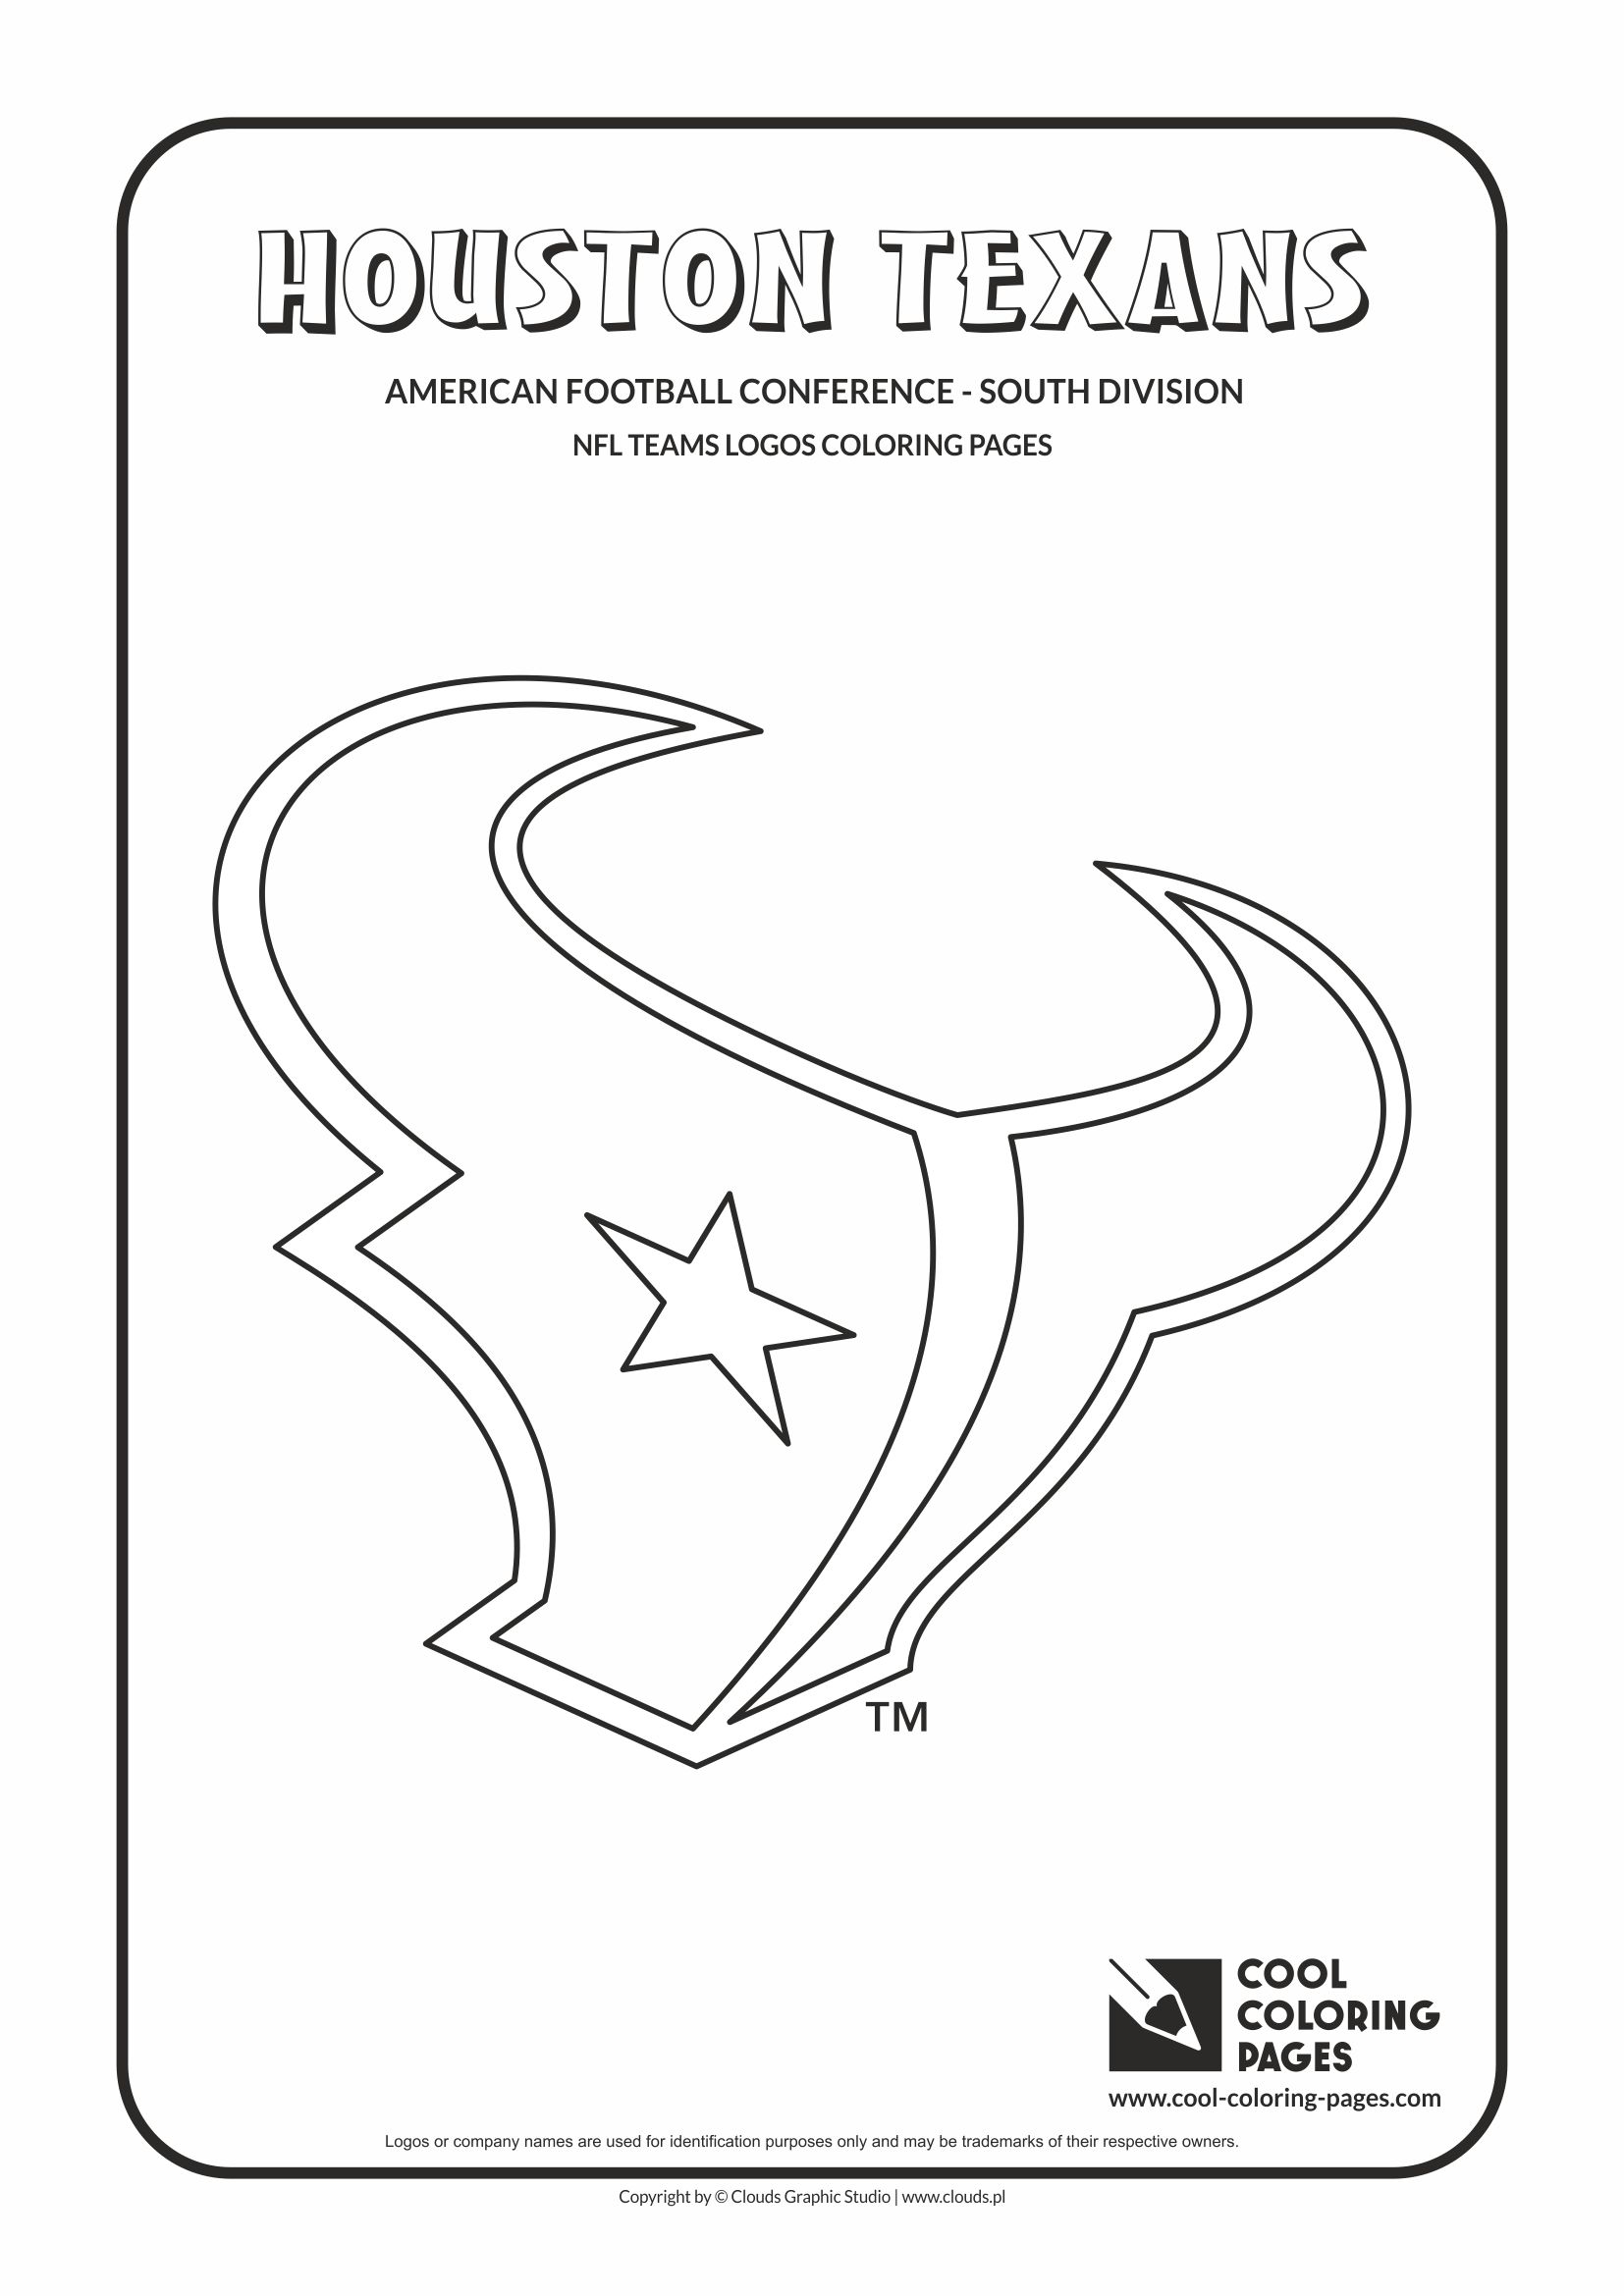 Cool Coloring Pages - NFL American Football Clubs Logos - American Football Conference - South Division / Houston Texans logo / Coloring page with Houston Texans logo